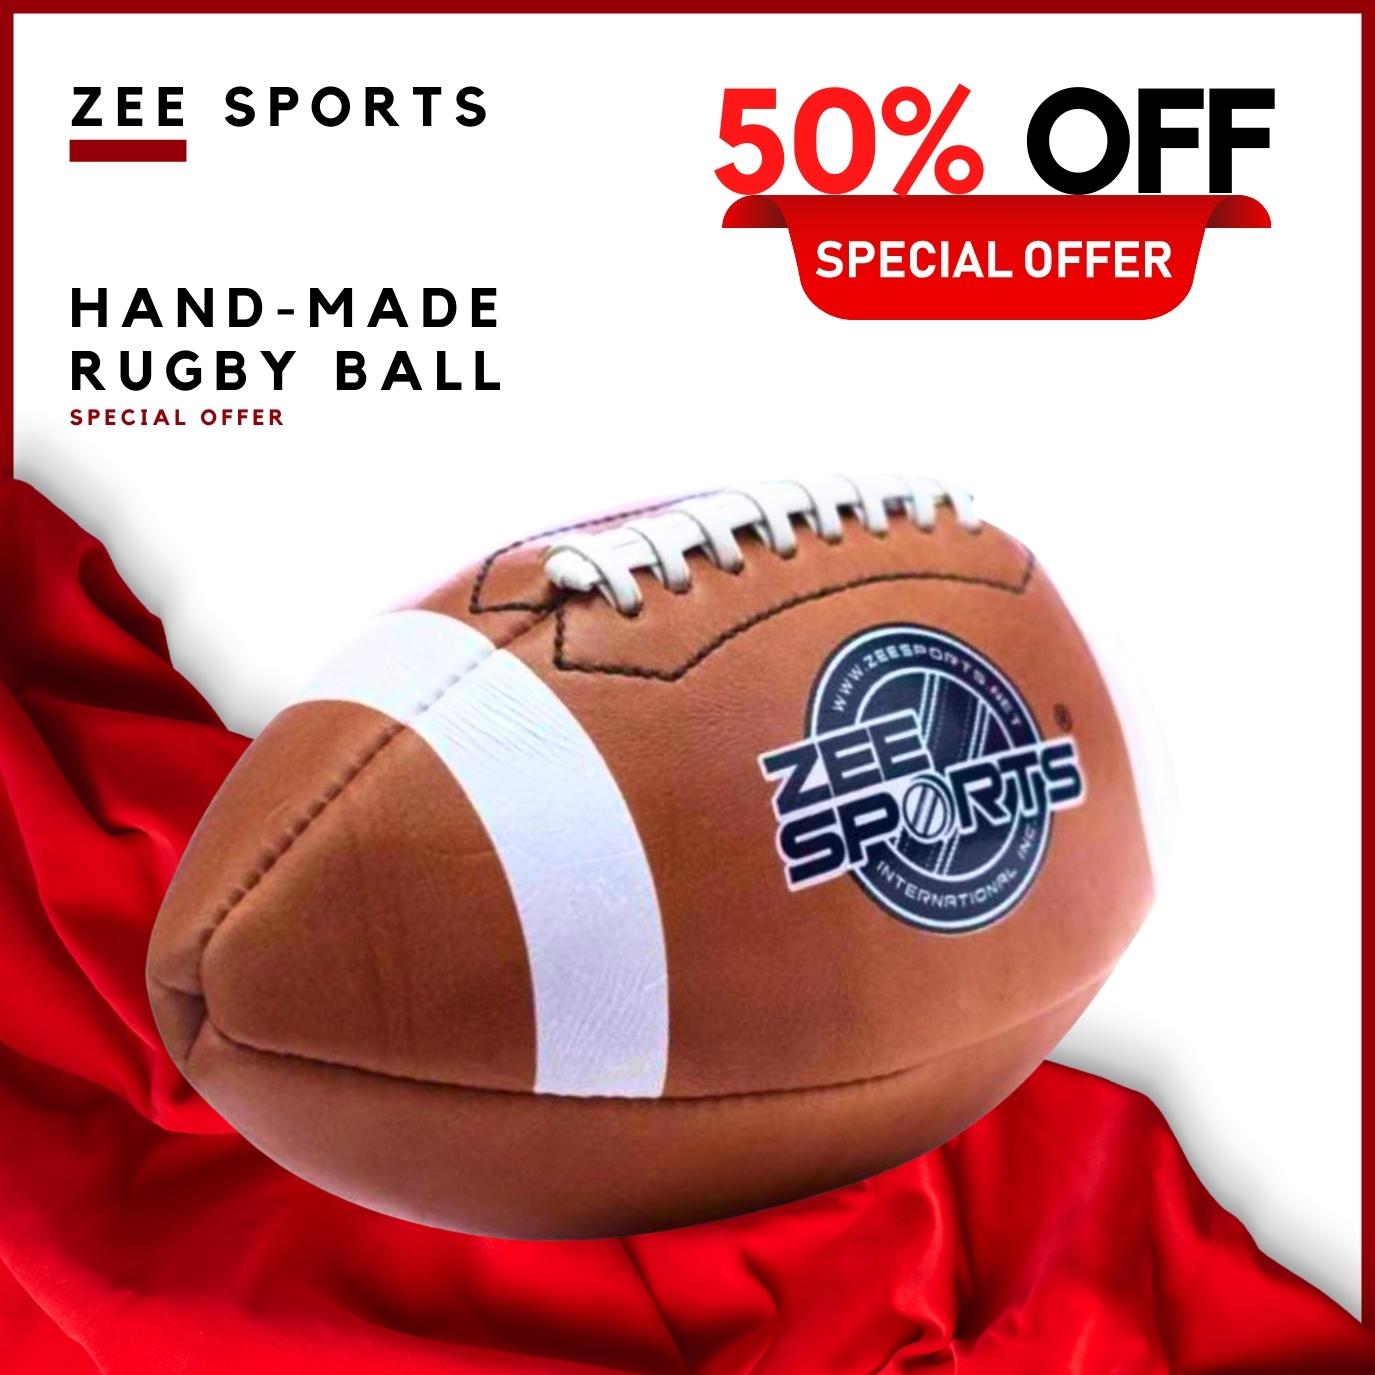 Zee Sports Hand-Made Rugby ball